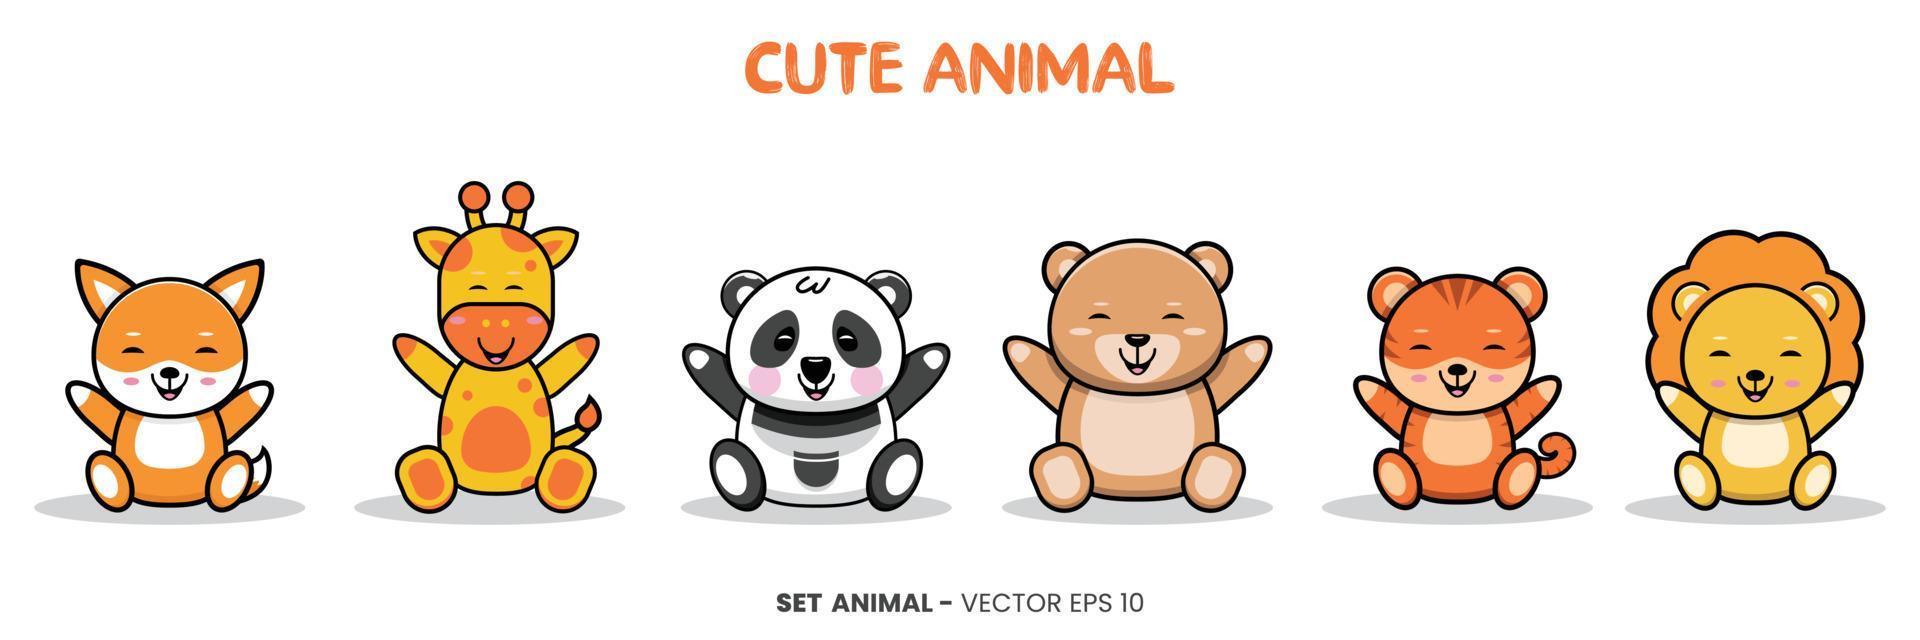 kids themed illustration with cute animal characters - giraffe, panda, bear, tiger, lion, and fox animal sitting with a happy expression and smiling. vector